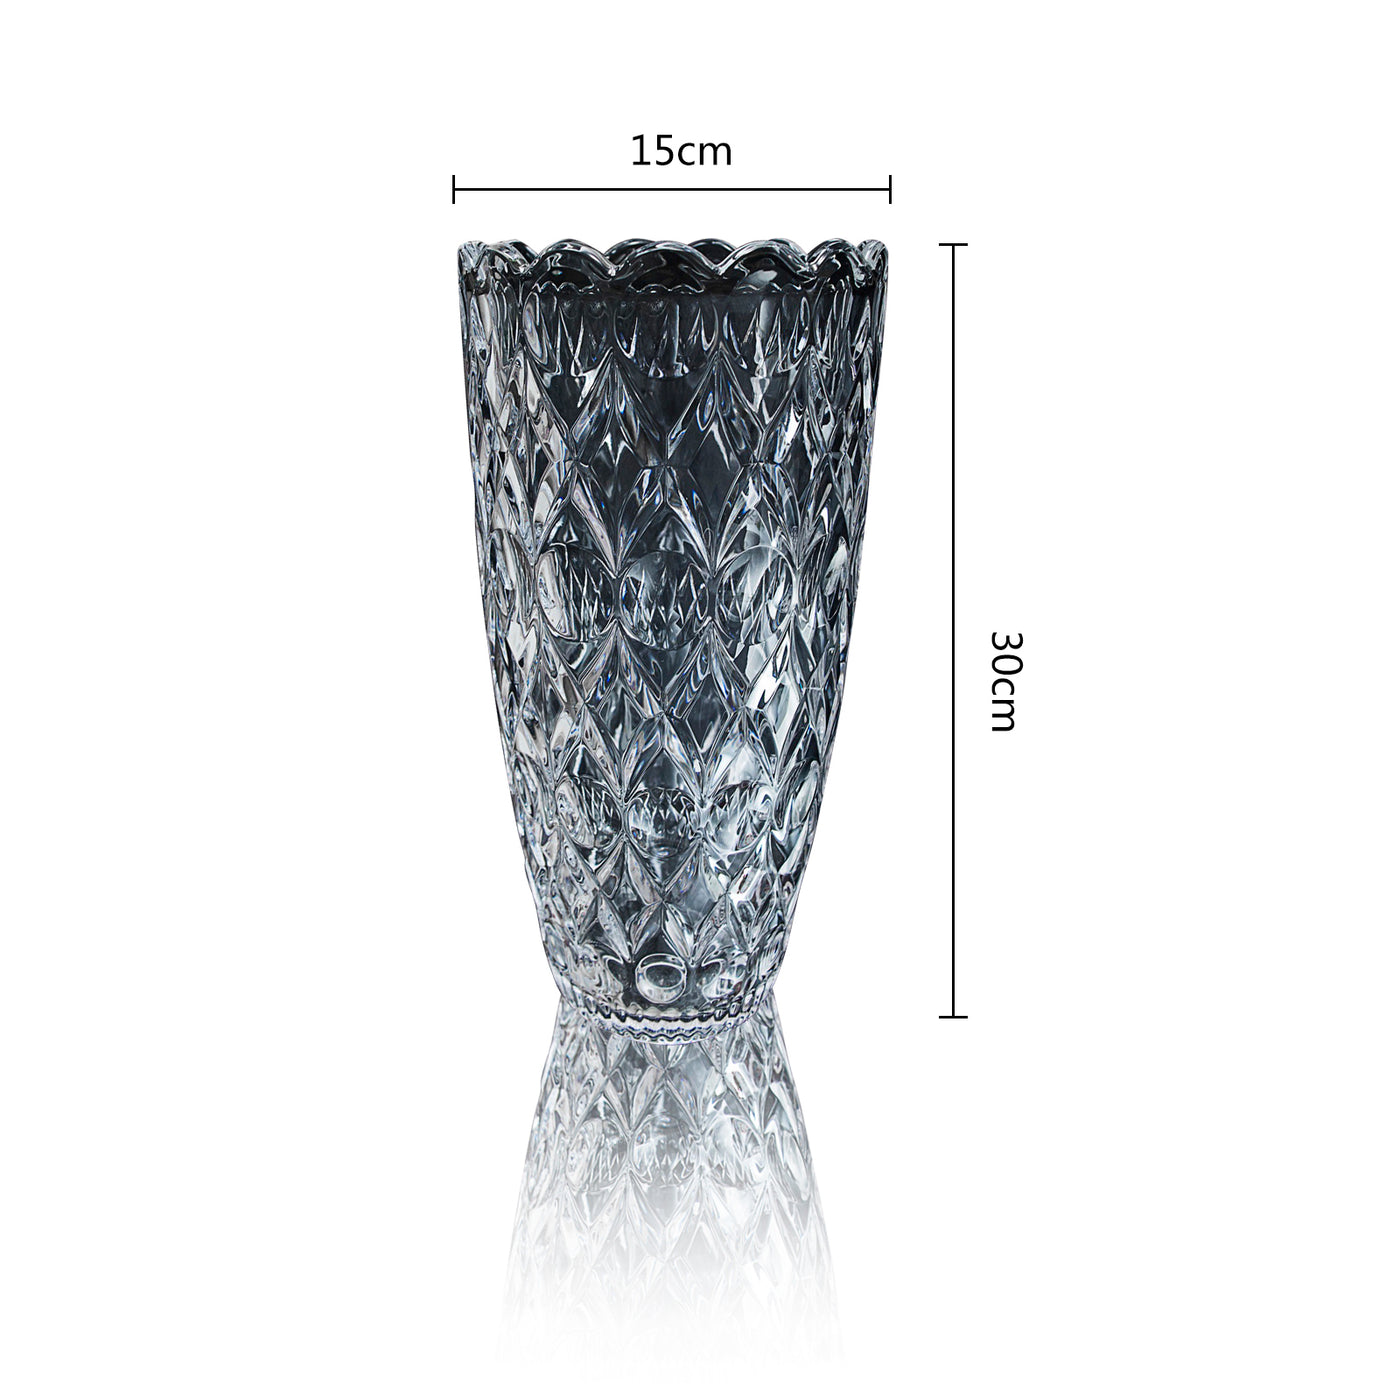 Crystal Vases for Flowers 12" Tall Glass Centerpieces Living Room Wedding Decor